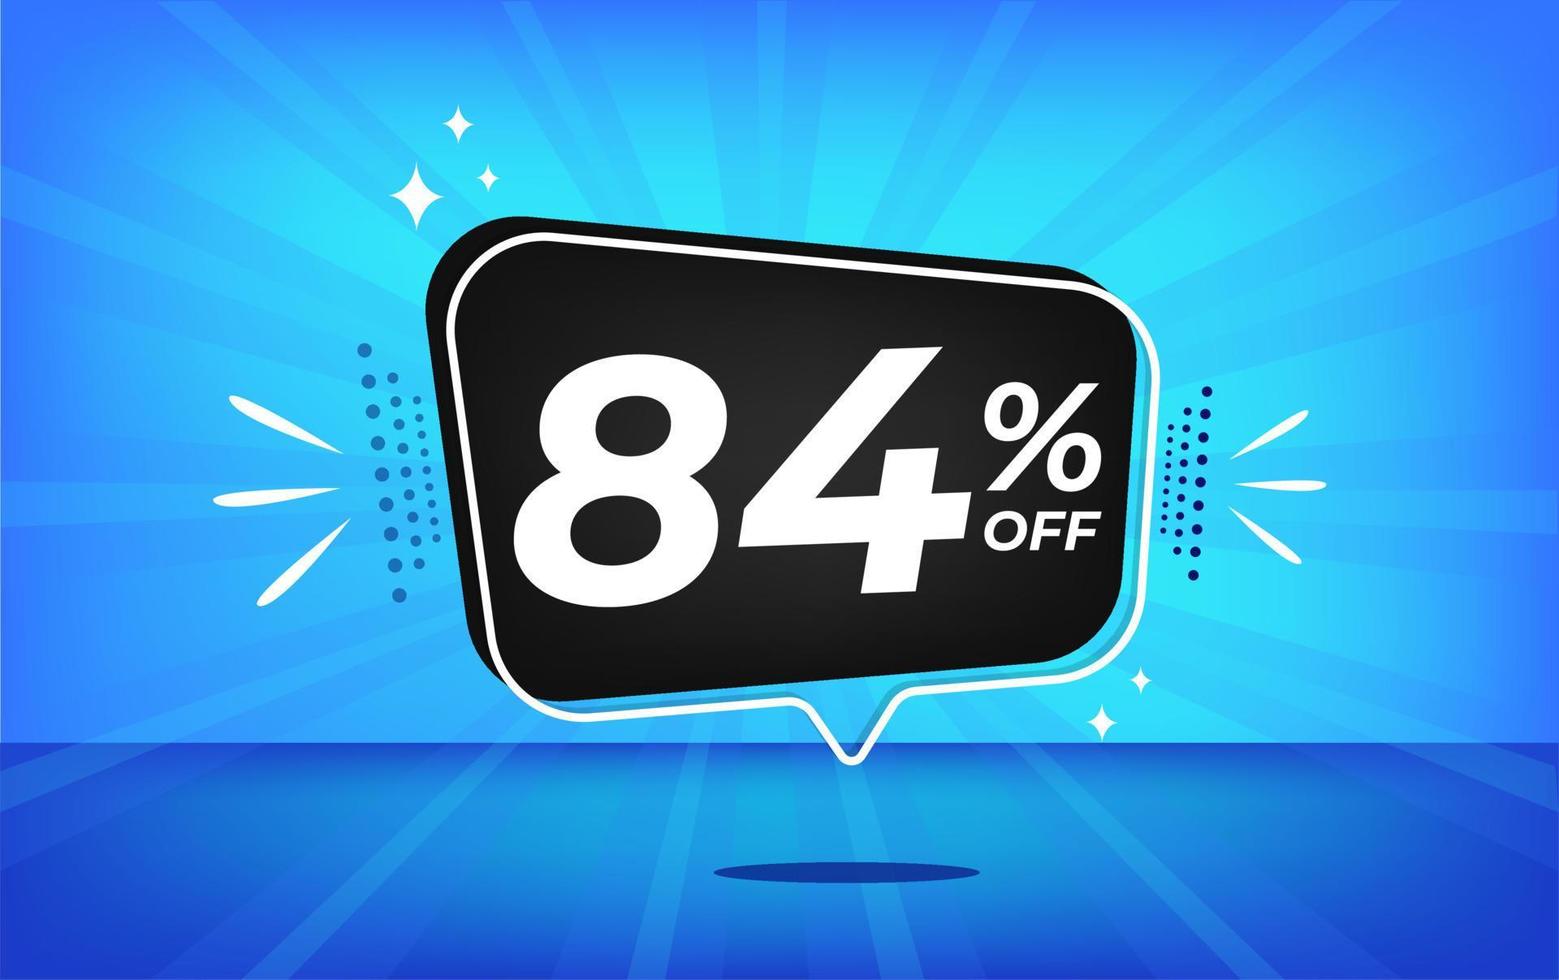 84 percent off. Blue banner with eighty percent discount on a black balloon for mega big sales. vector